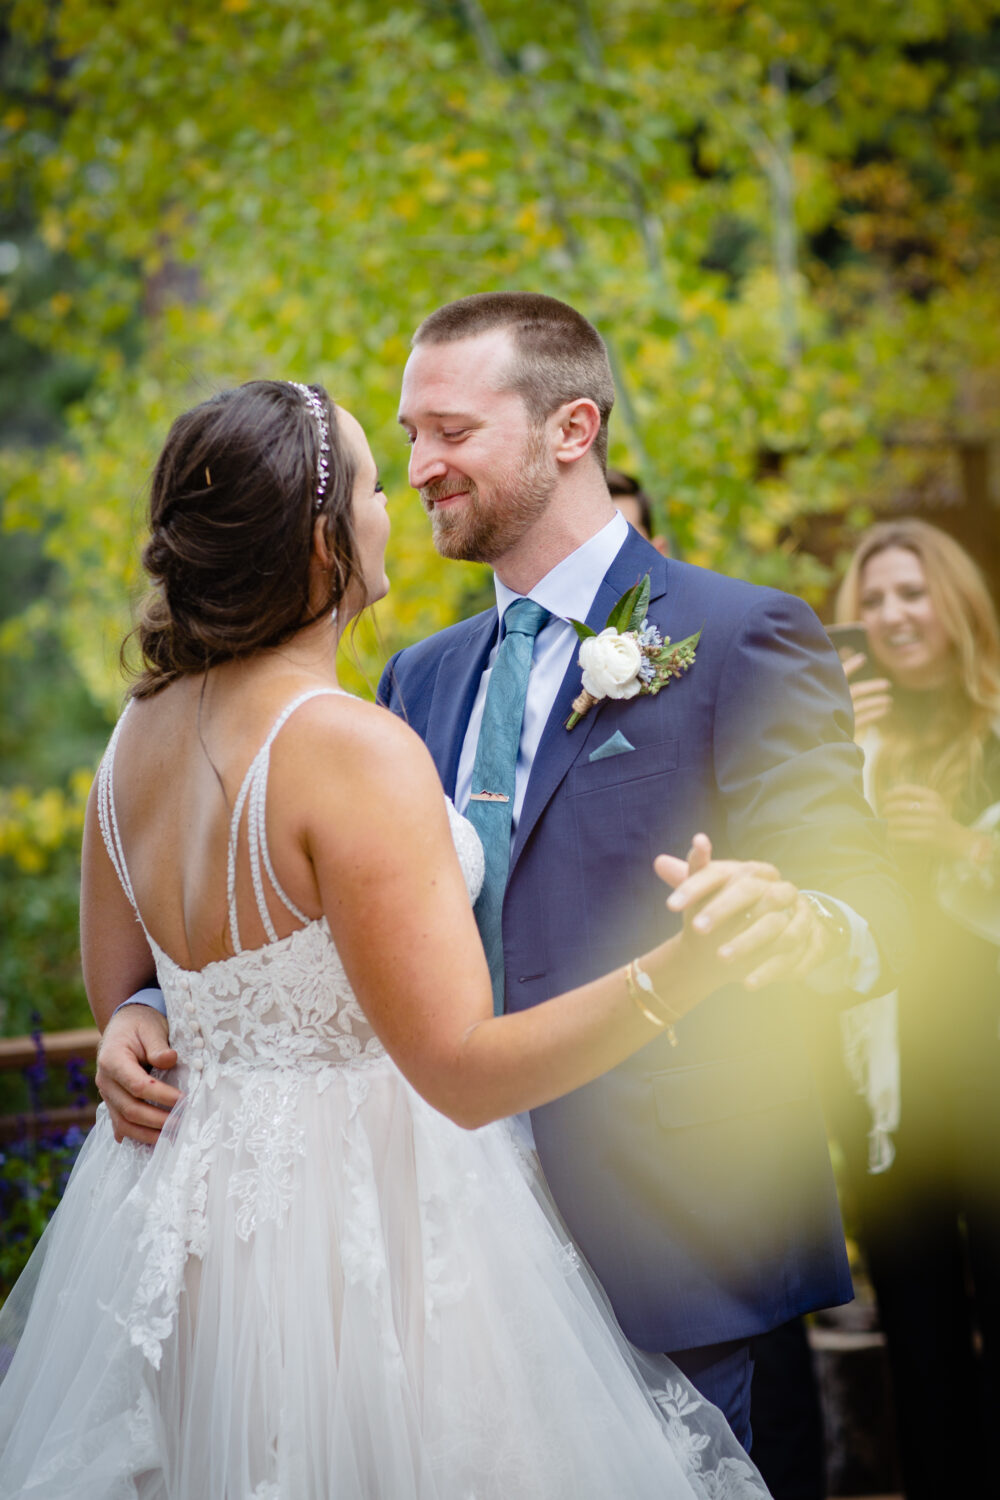 The newlywed's first dance at a Tahoe wedding with fall colors.